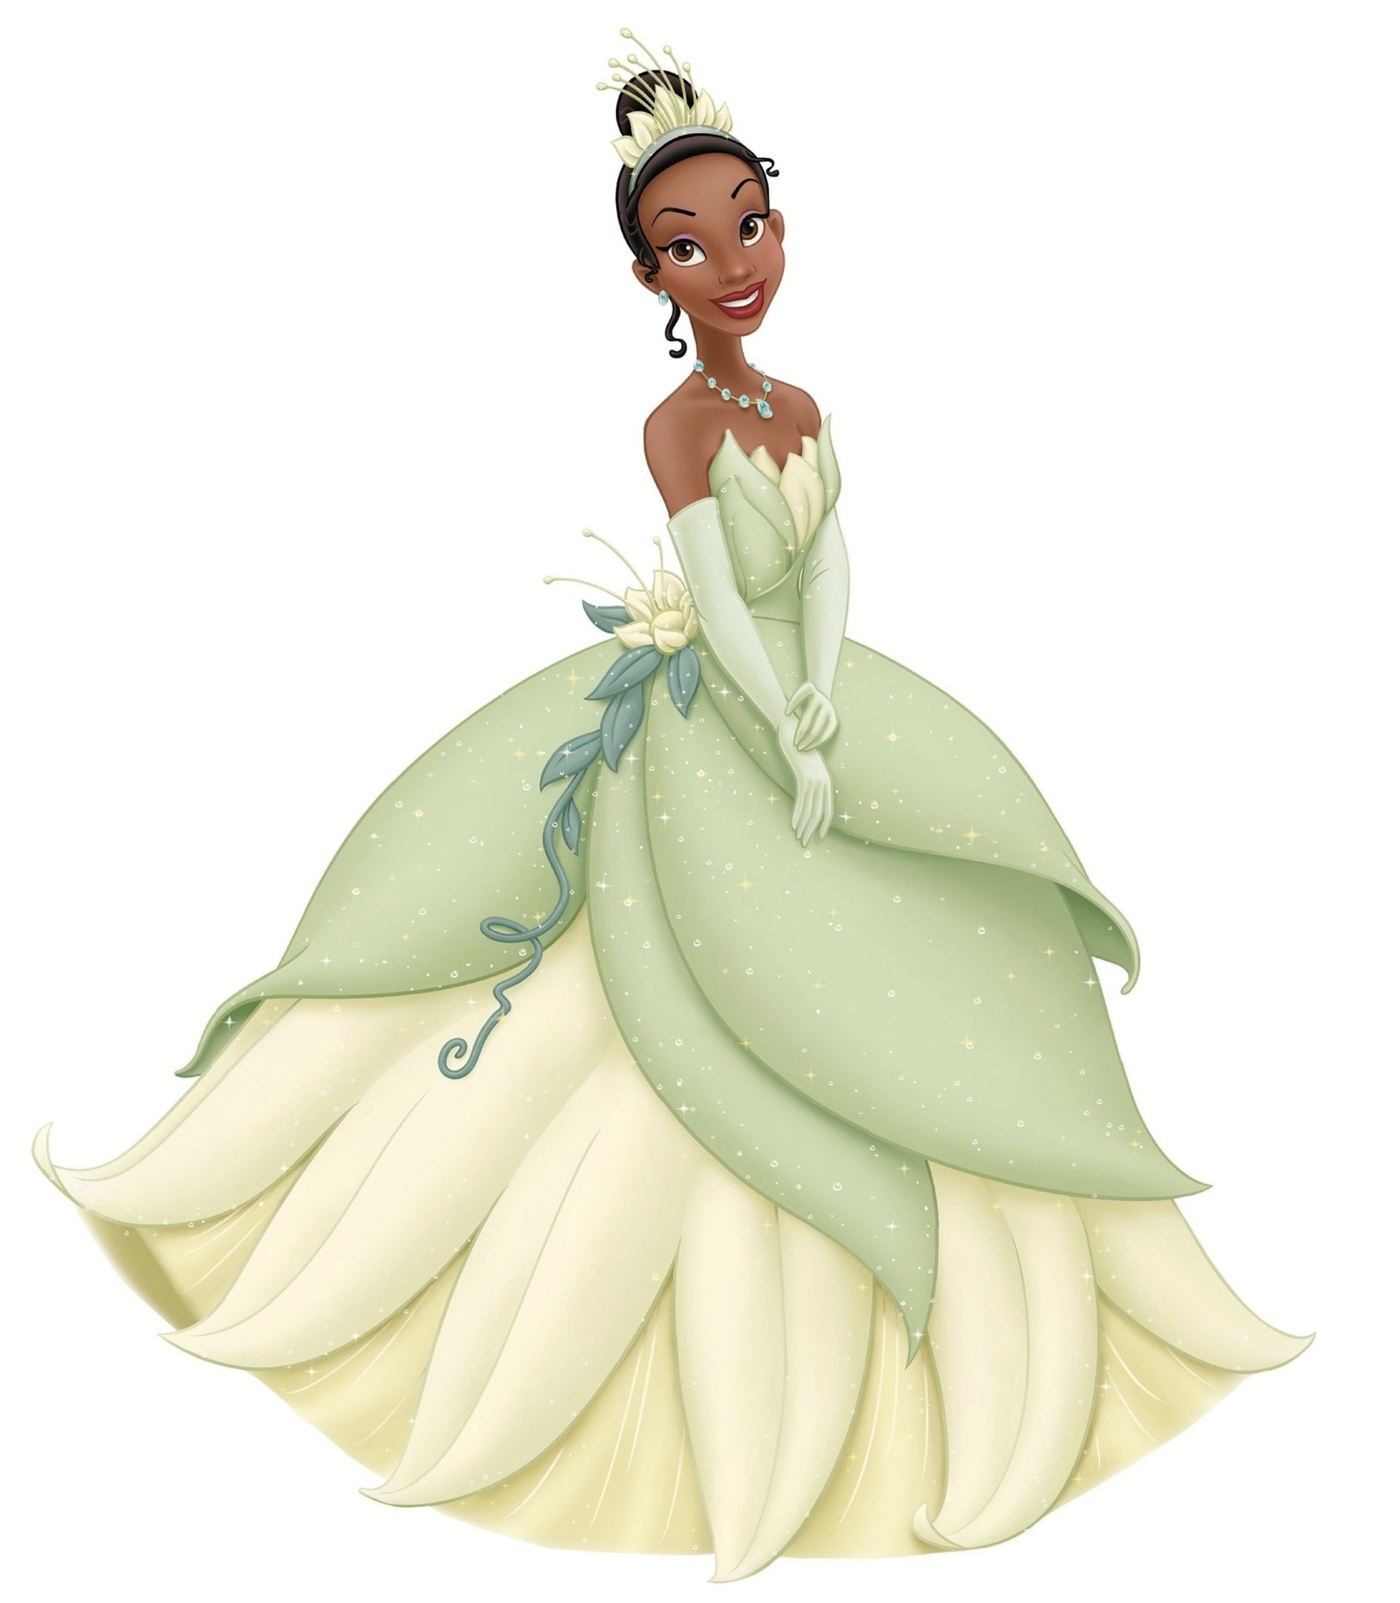 Tiana The Frog Princess – The New Heroines